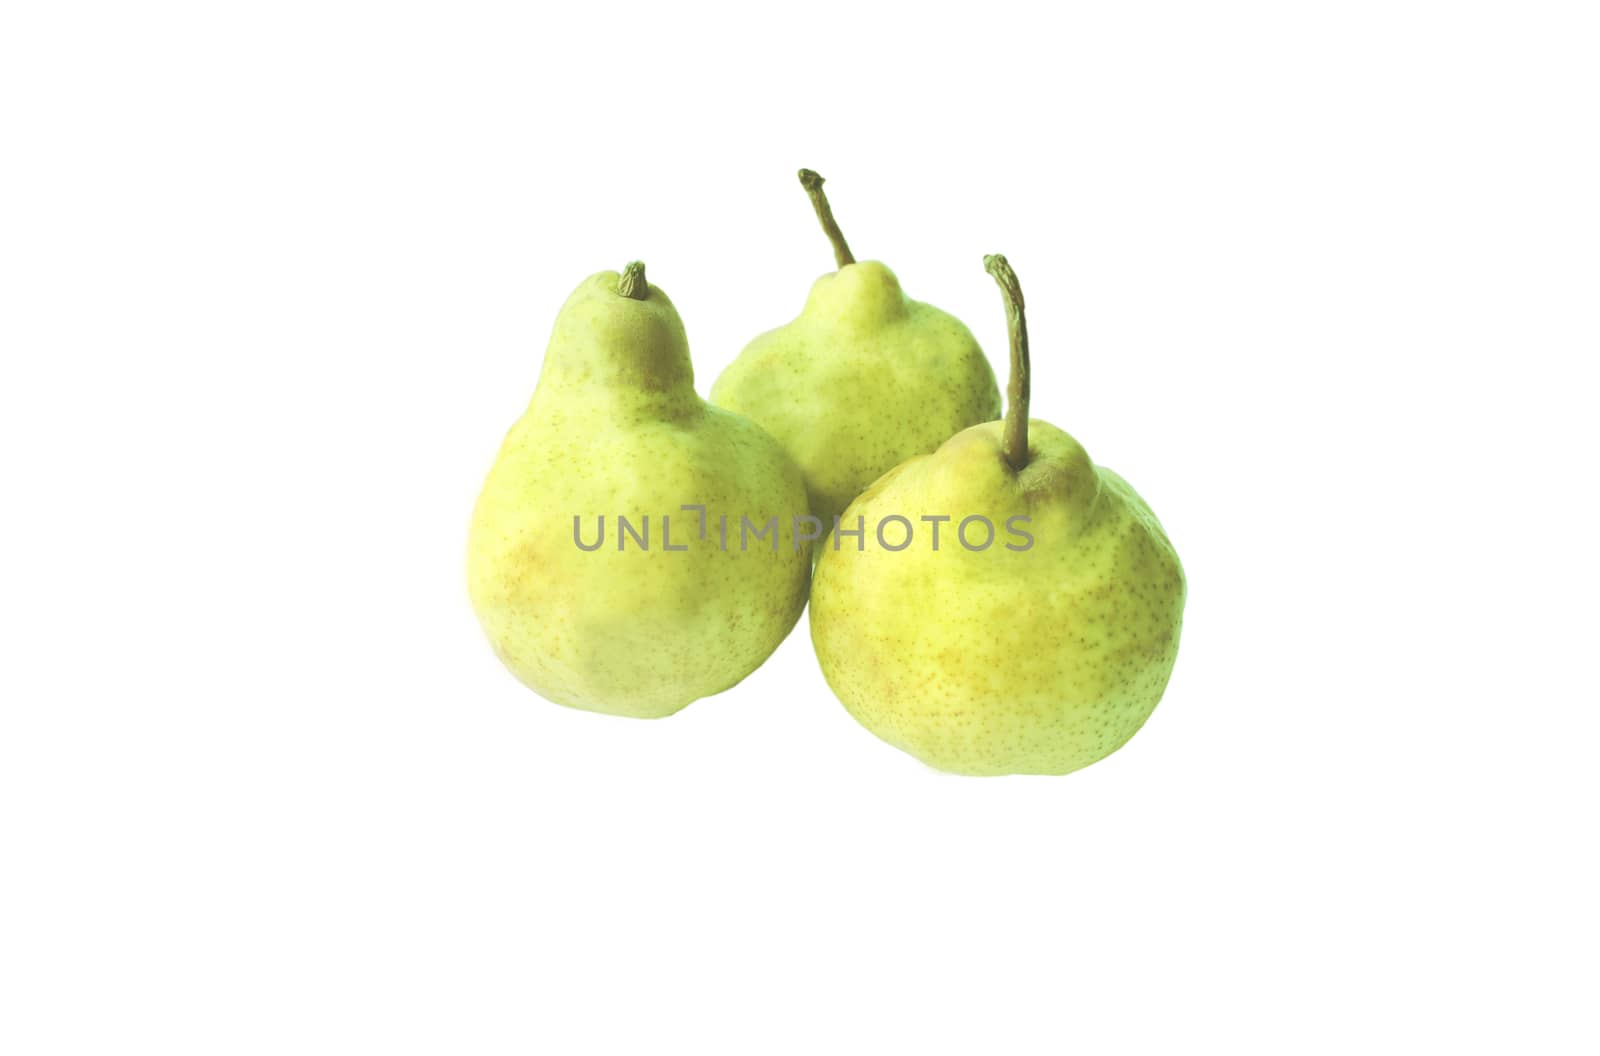 Three pears on a white background